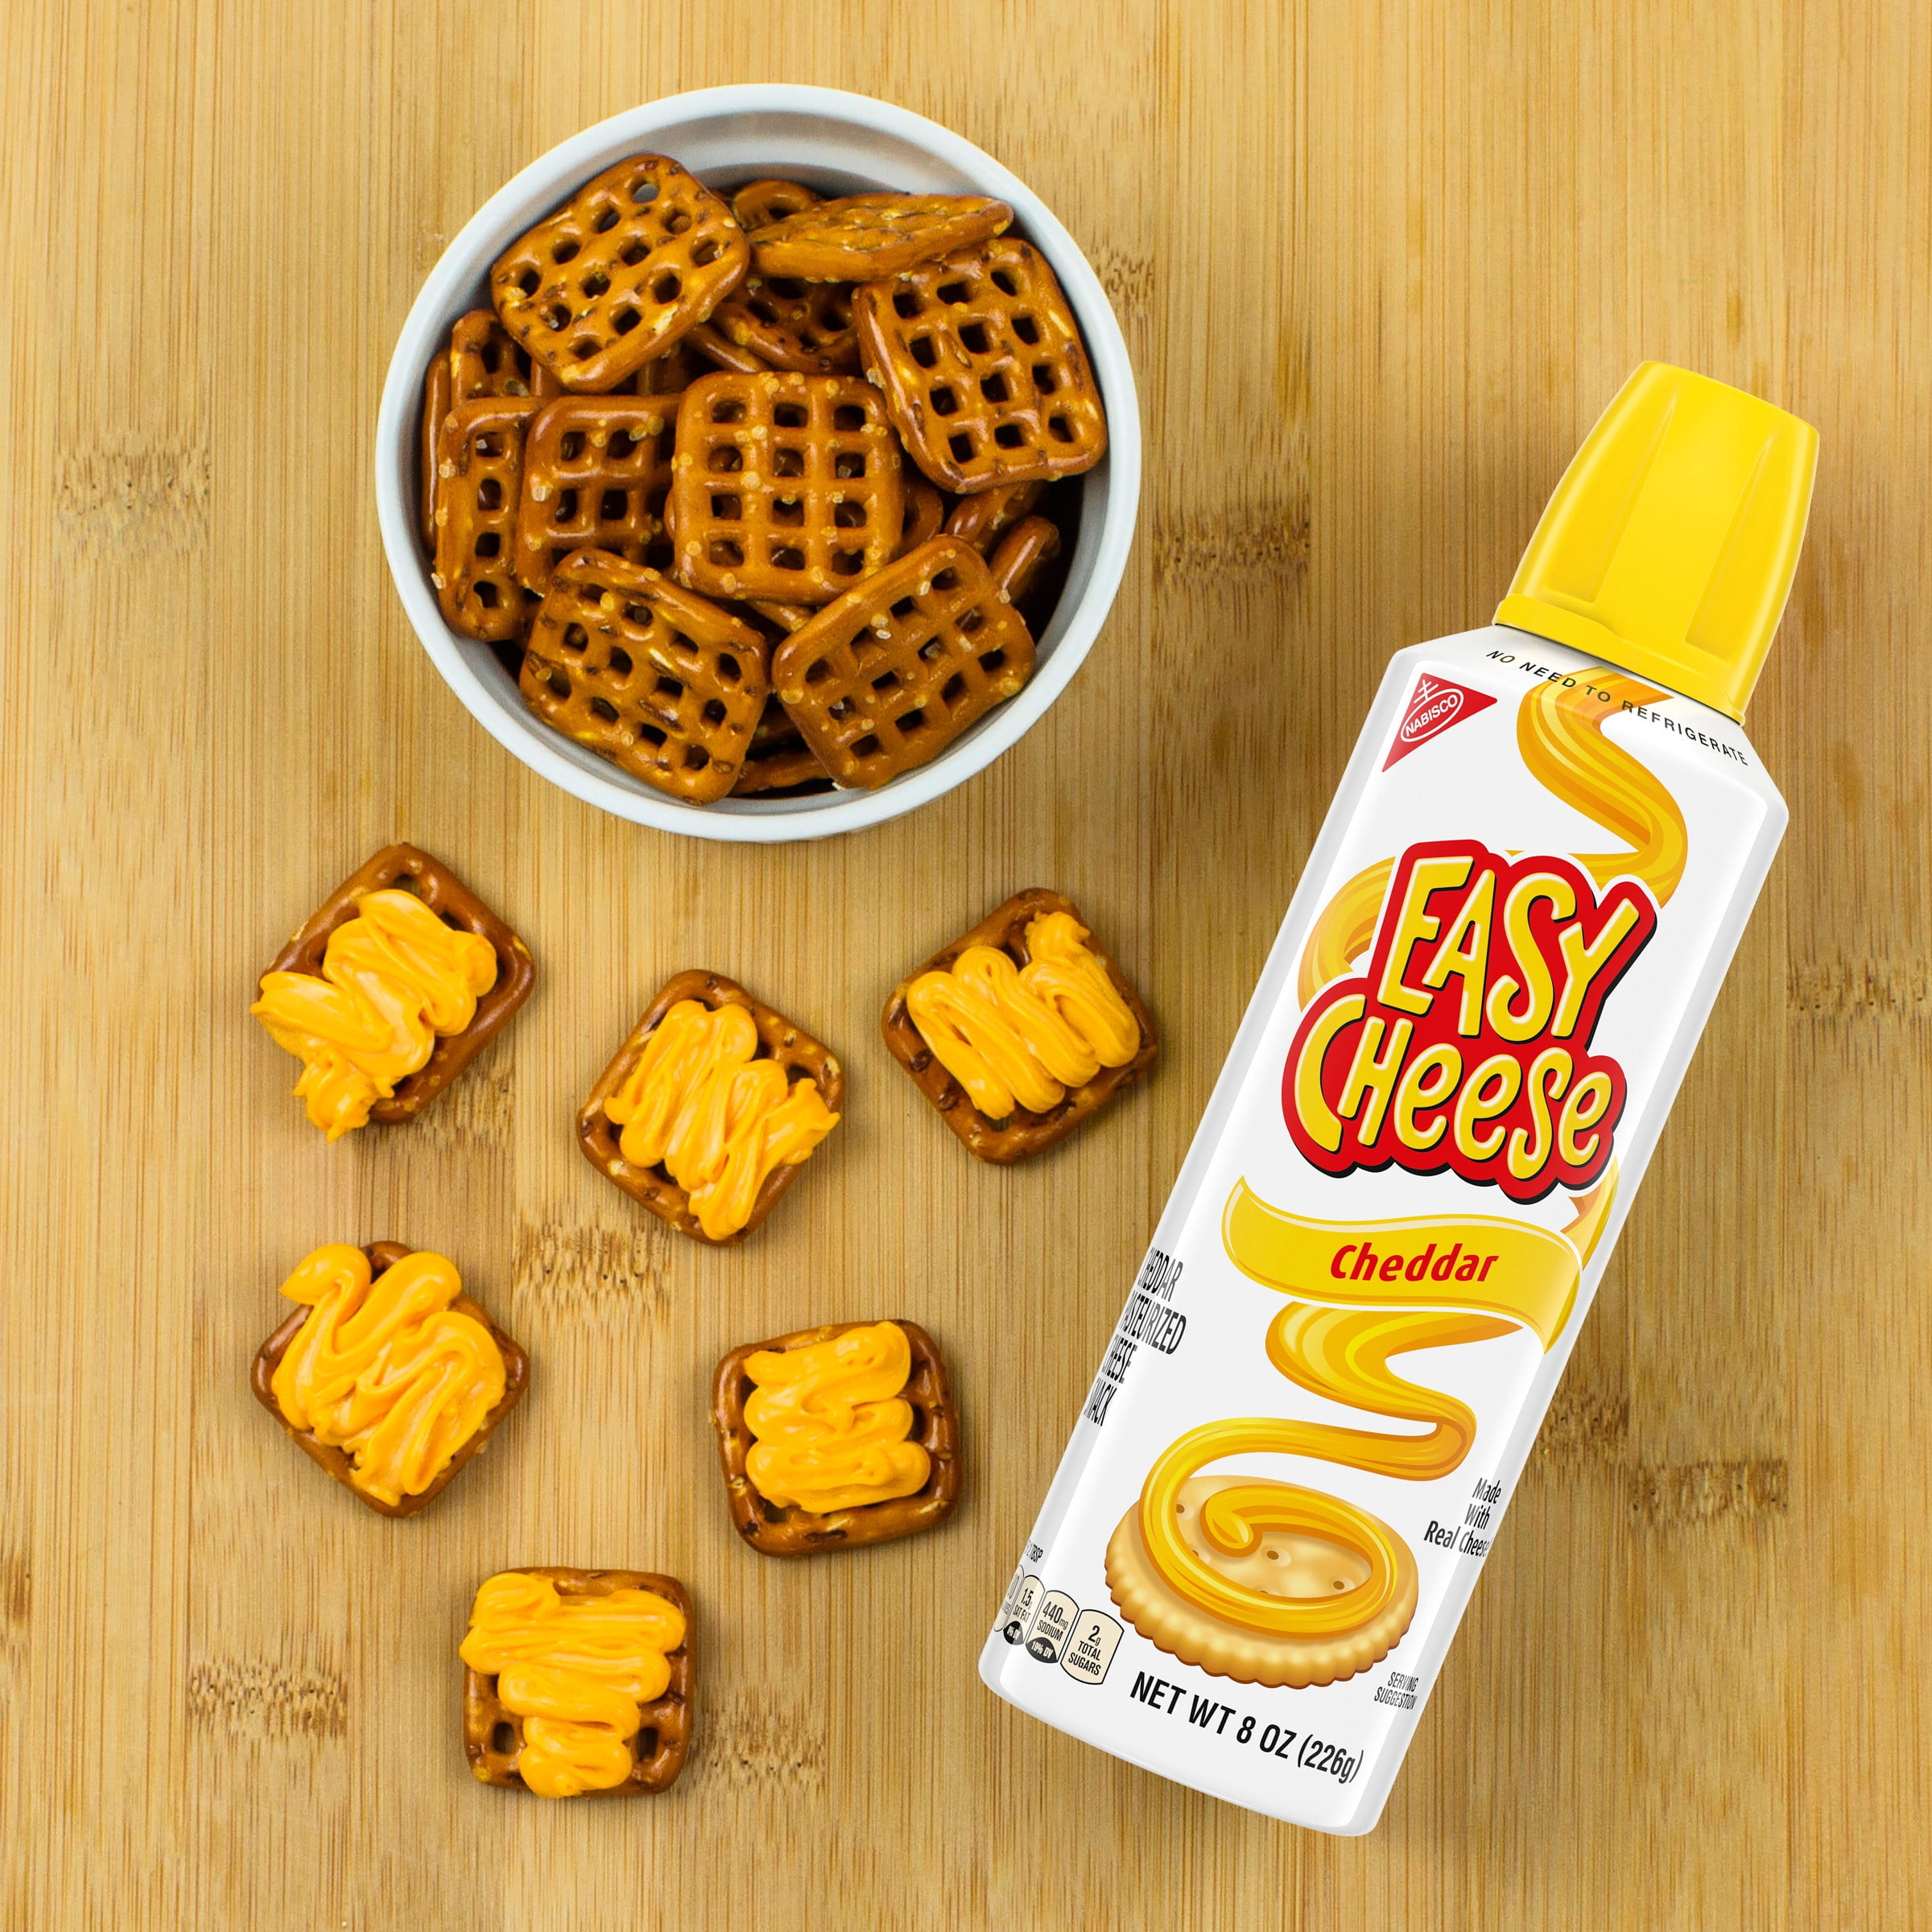 Easy Cheese Cheddar Cheese Snack, 8 oz 